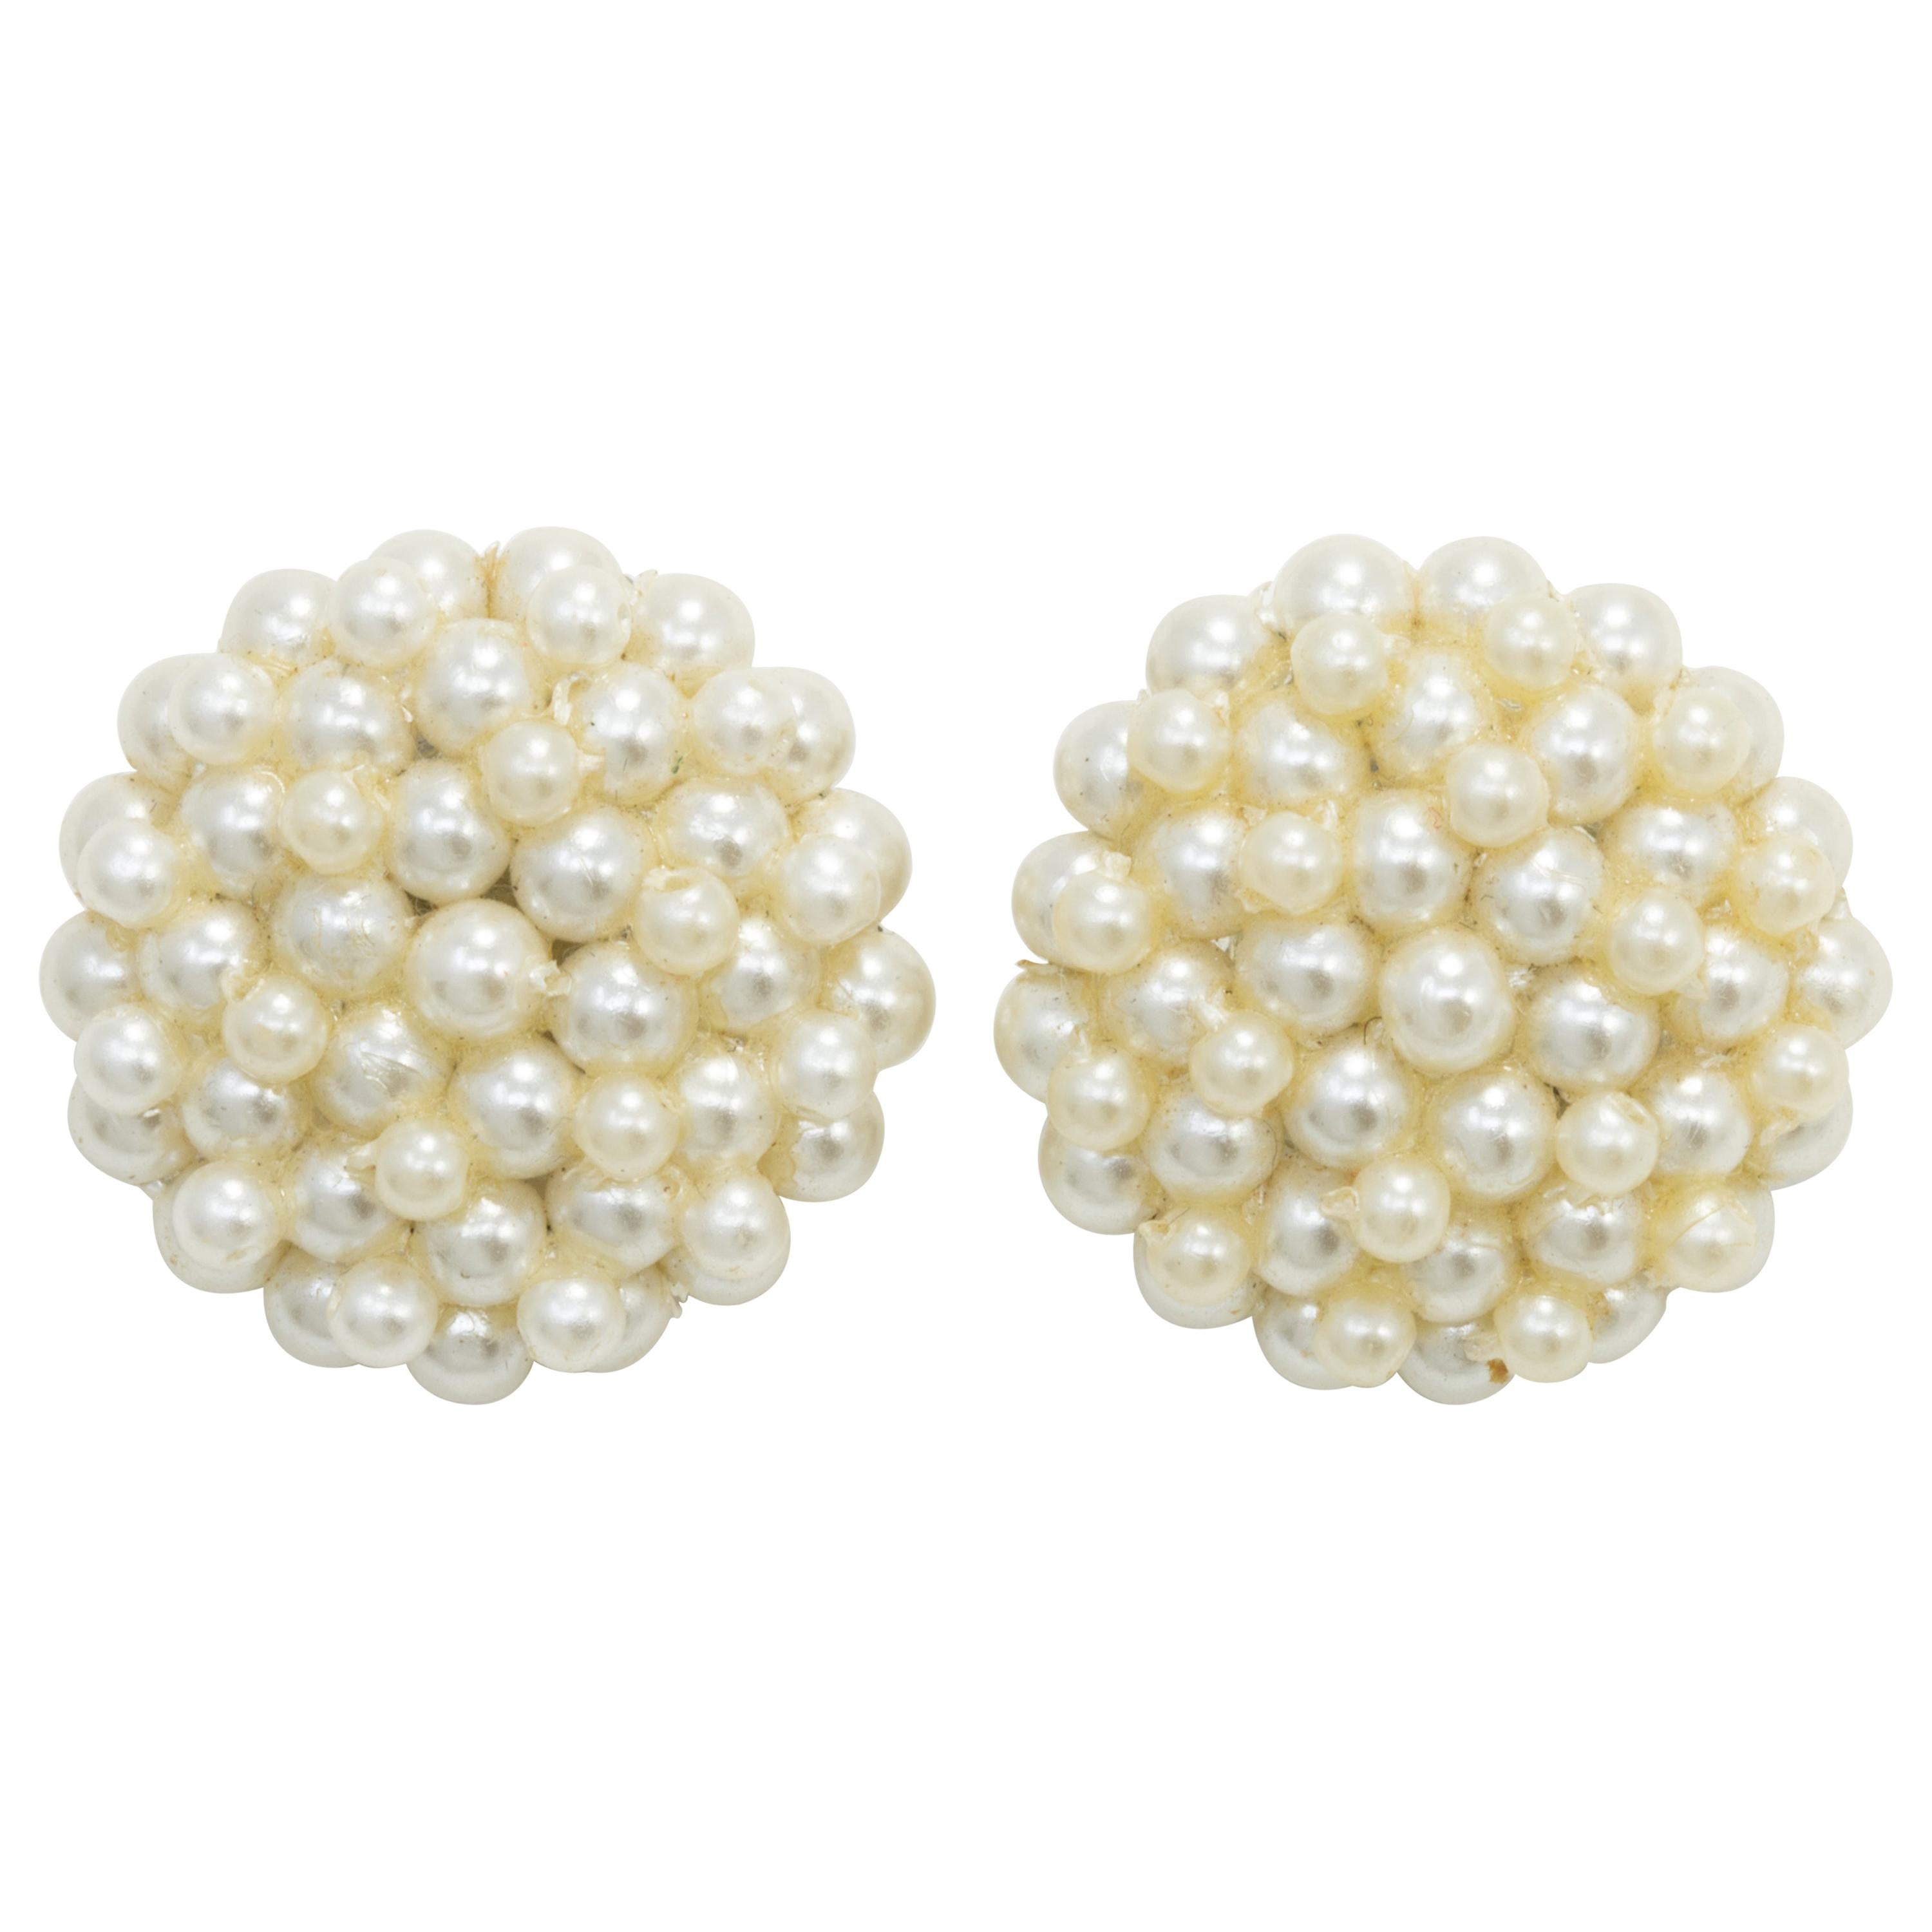 Faux Pearl Cluster Round Earrings, Mid 1900s Statement Clip Ons